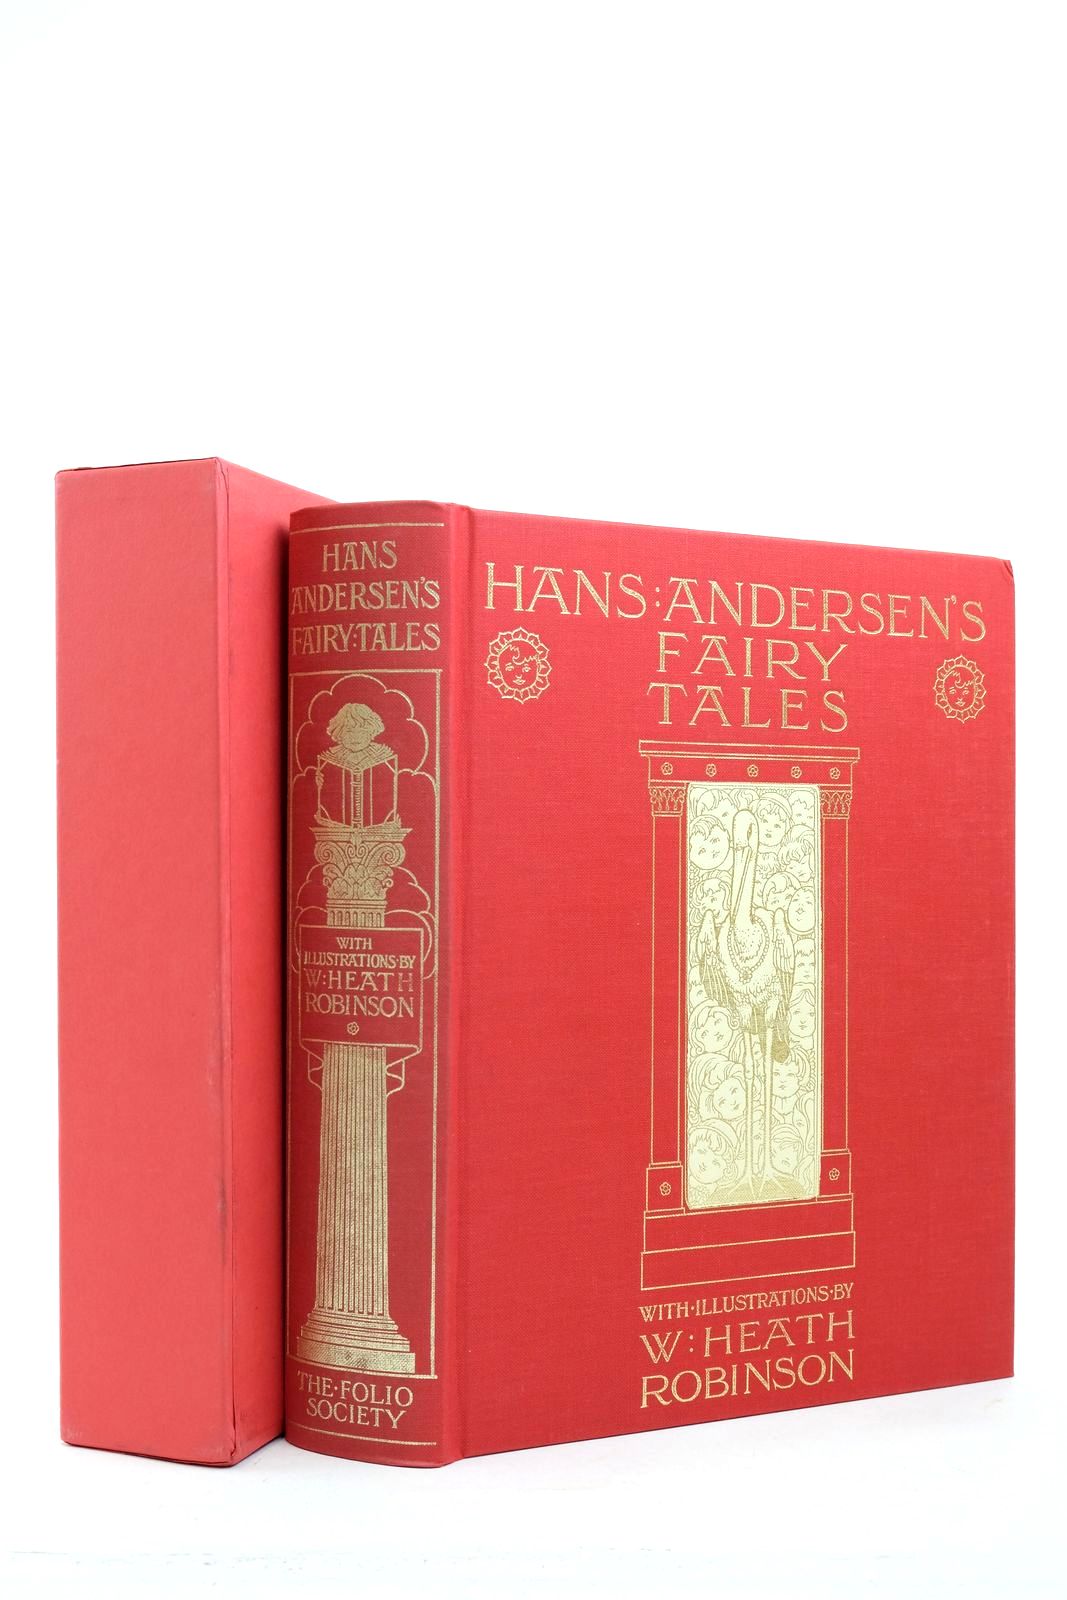 Photo of HANS ANDERSEN'S FAIRY TALES written by Andersen, Hans Christian illustrated by Robinson, W. Heath published by Folio Society (STOCK CODE: 2140957)  for sale by Stella & Rose's Books